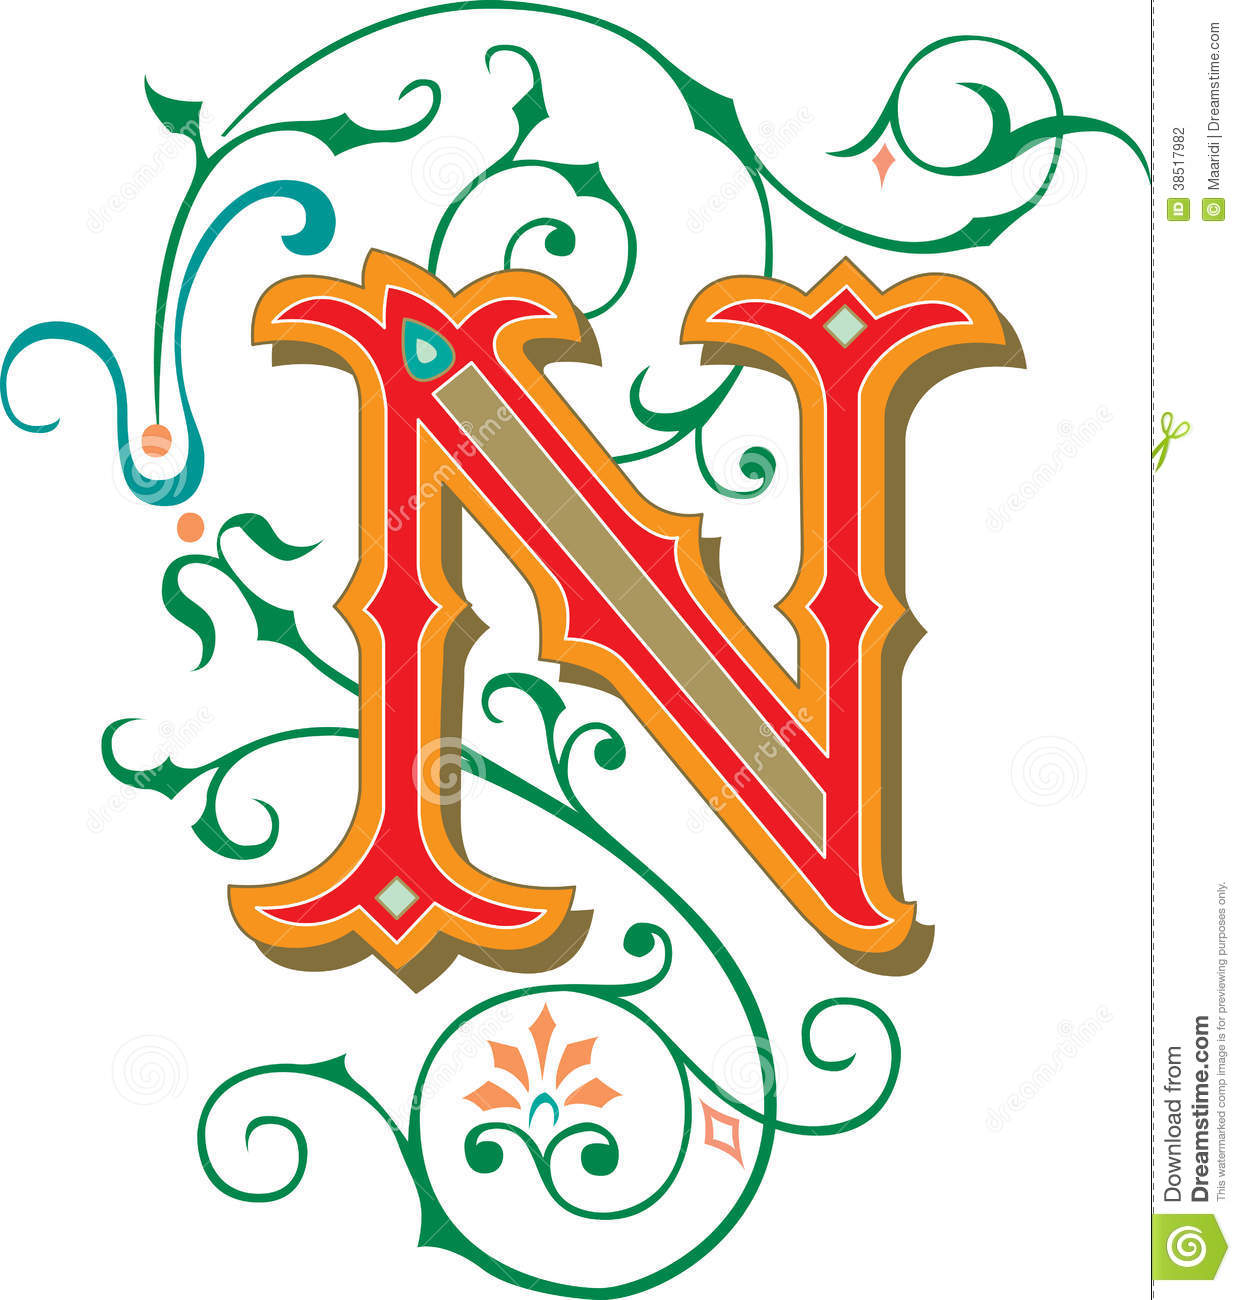 n freetoedit letter letters background image by @paletters